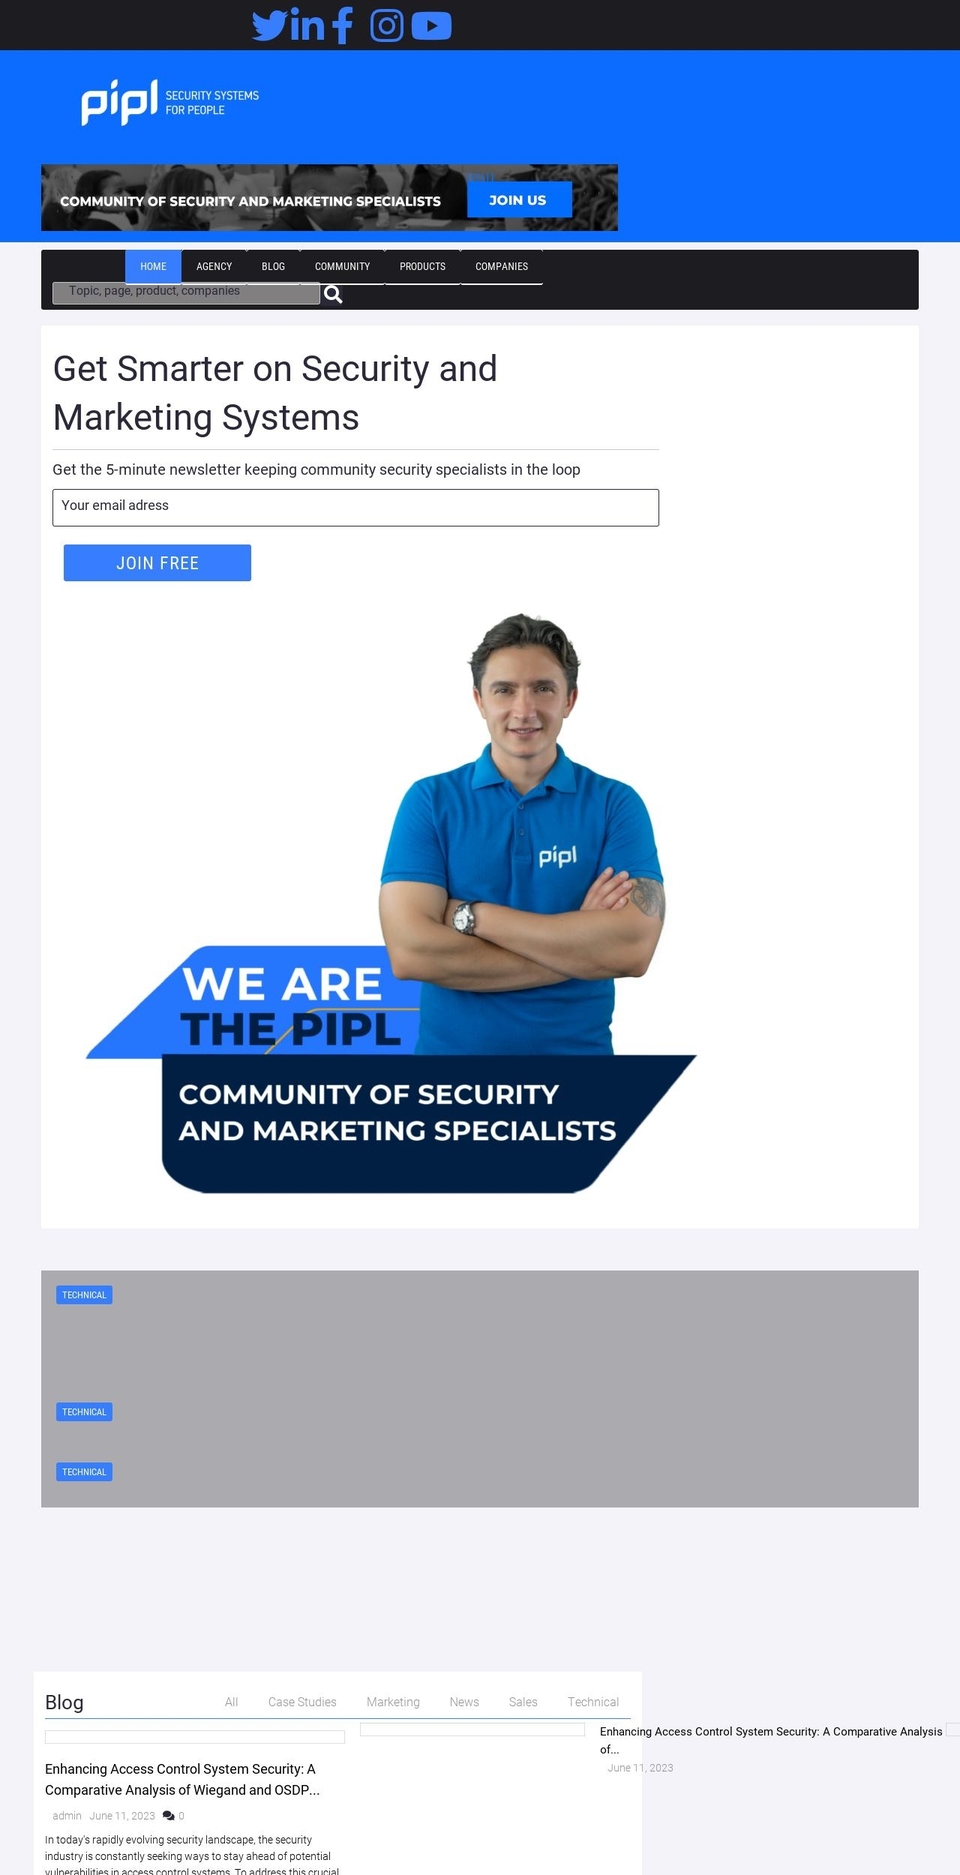 pipl.systems shopify website screenshot